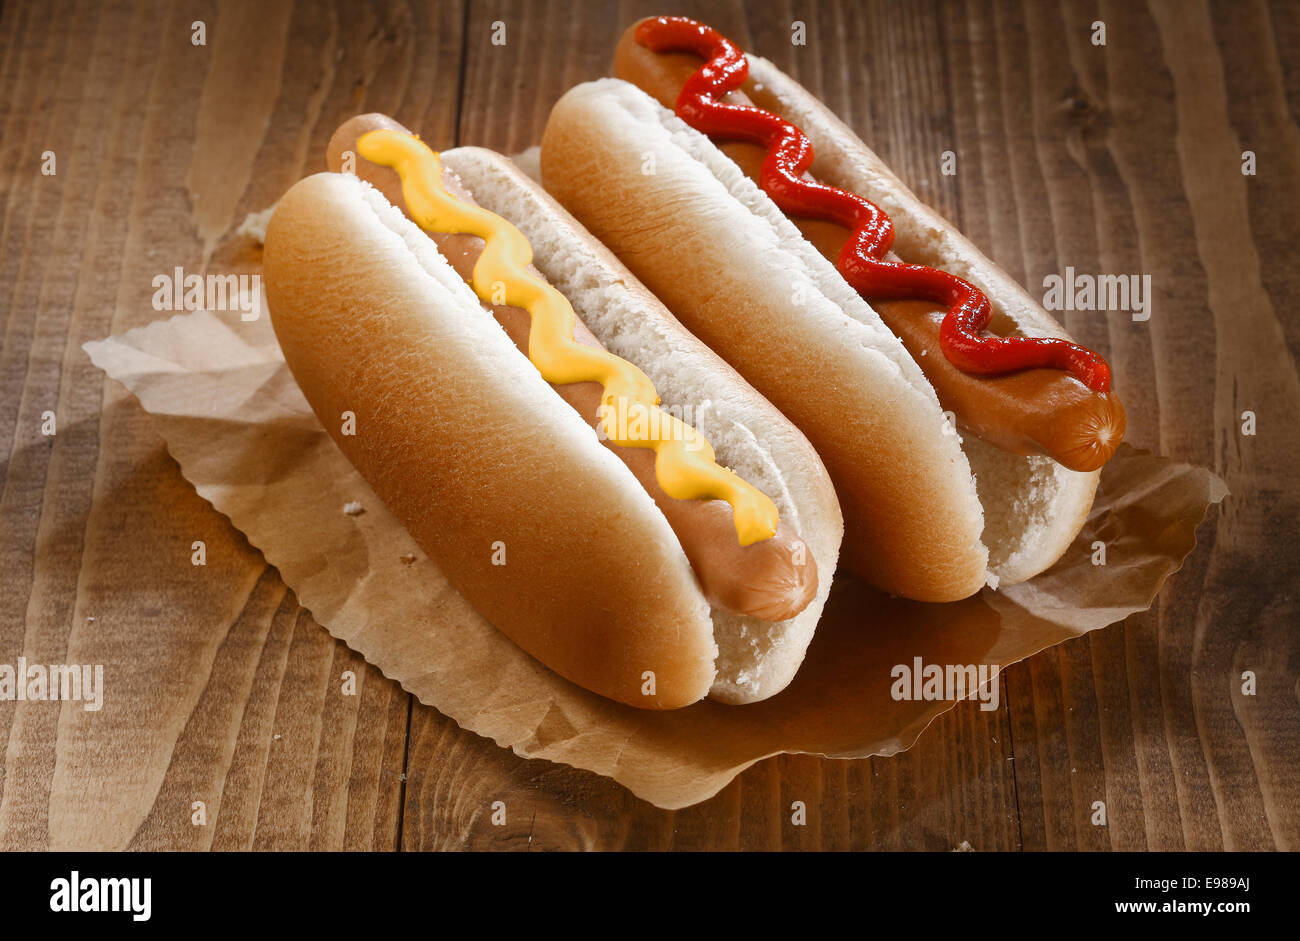 Two appetizing hotdogs with mustard and ketchup, close up Stock Photo